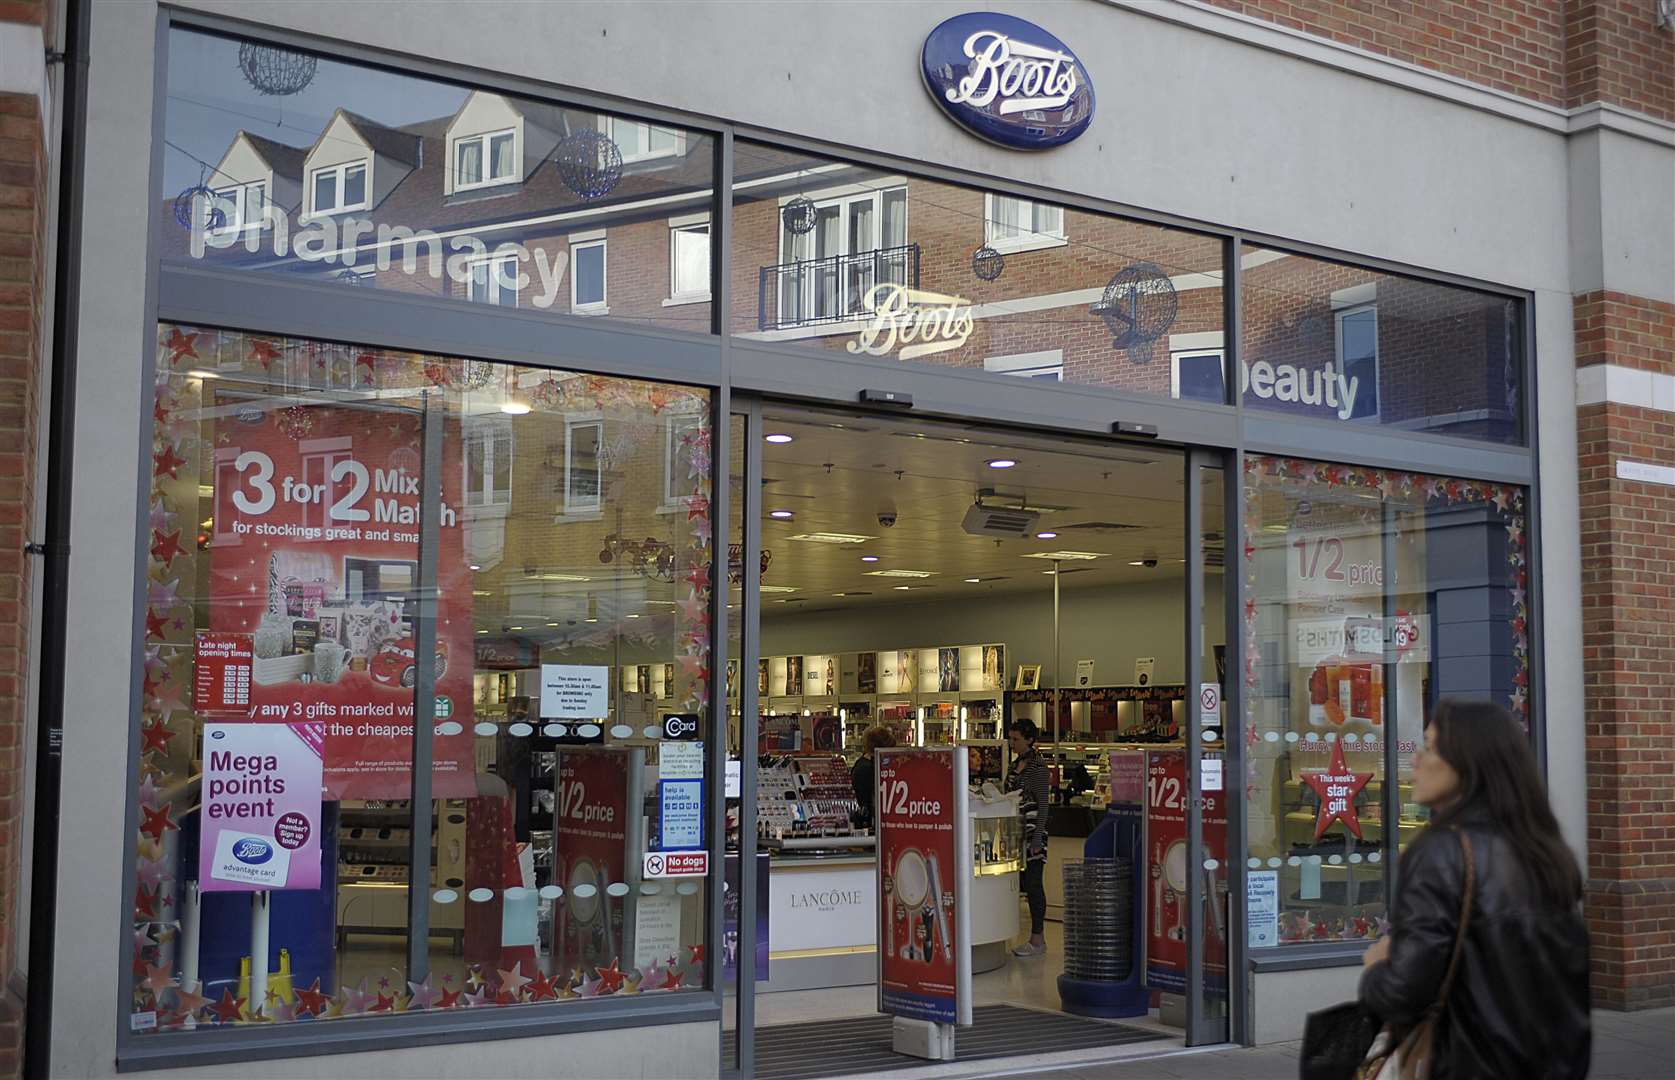 Boots has branches across the county